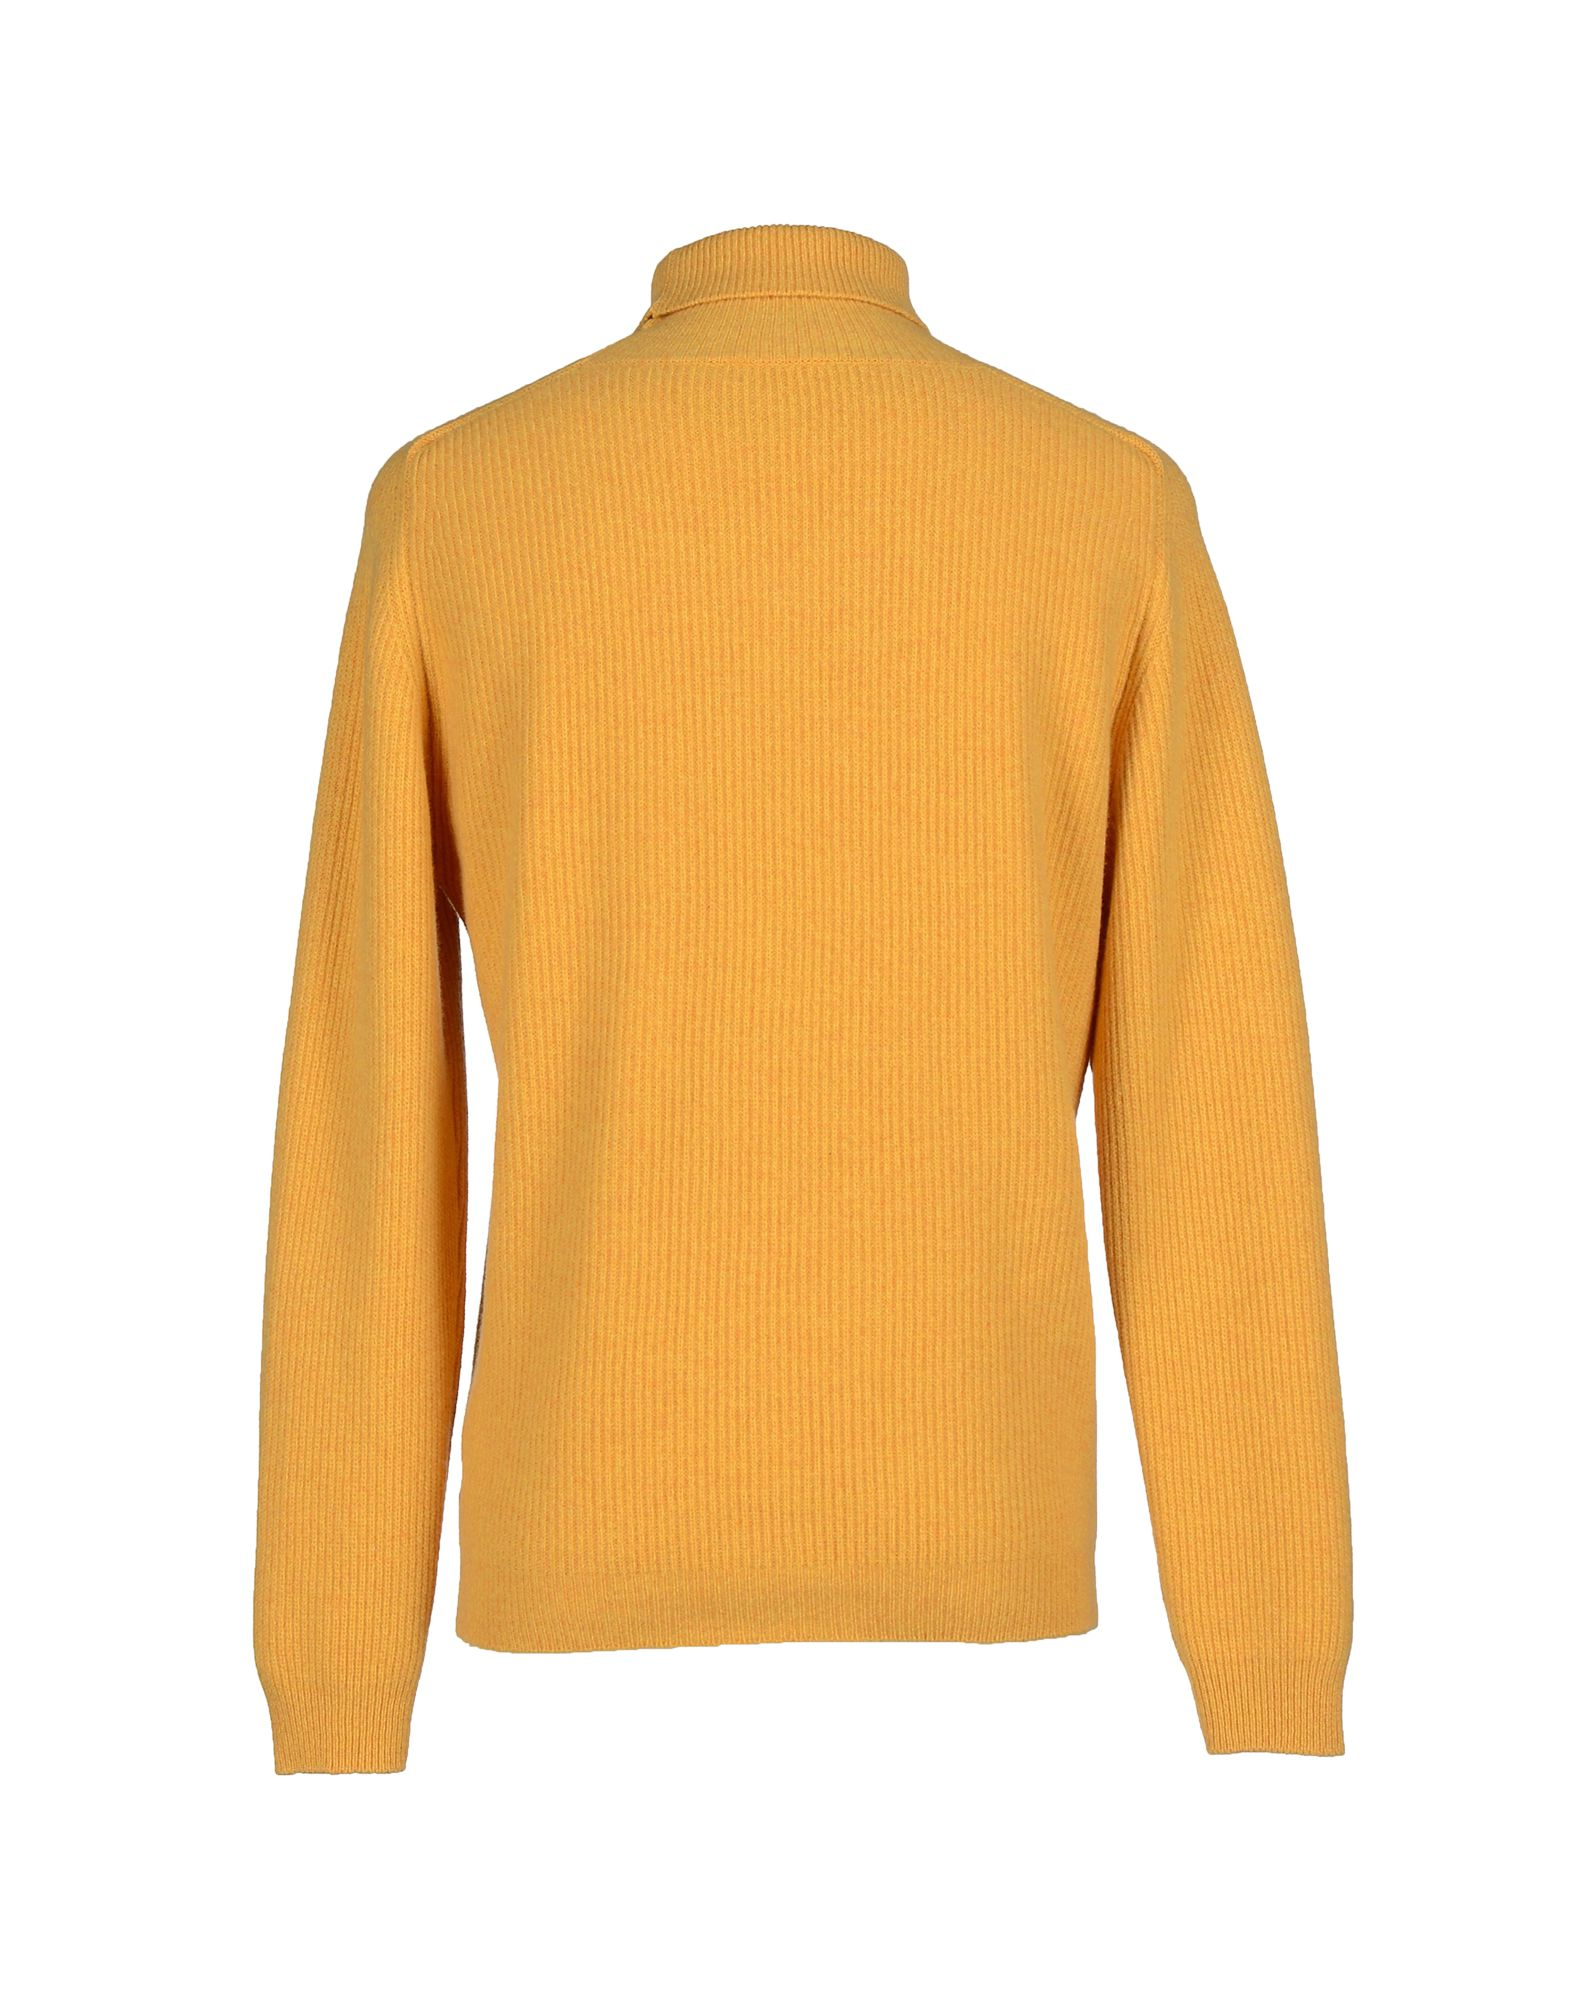 Lyst - People Turtleneck in Yellow for Men